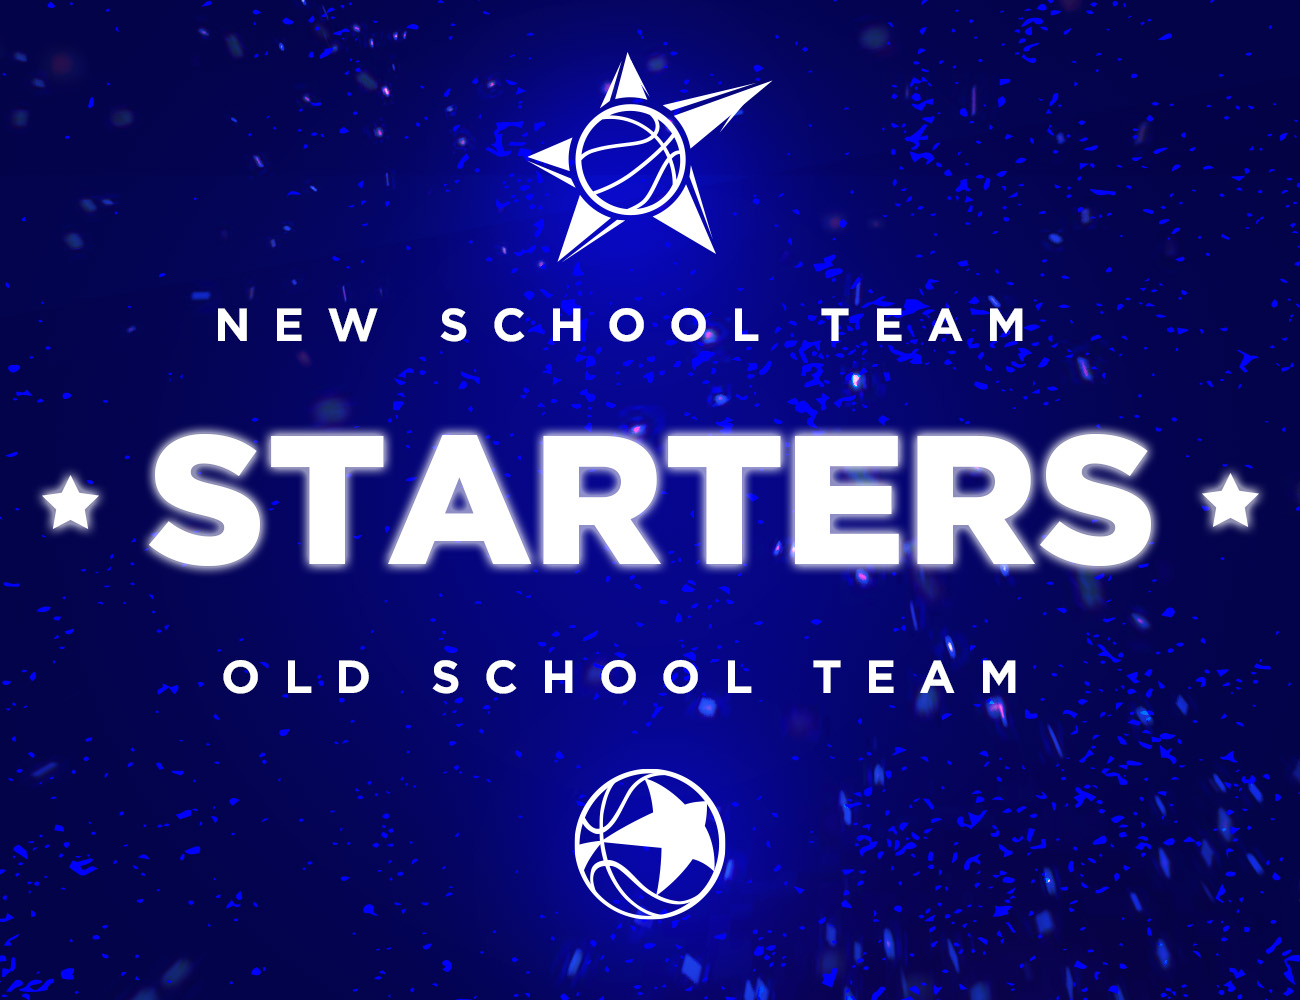 The New School and Old School teams Head Coaches announced the Starters for the All-Star Game